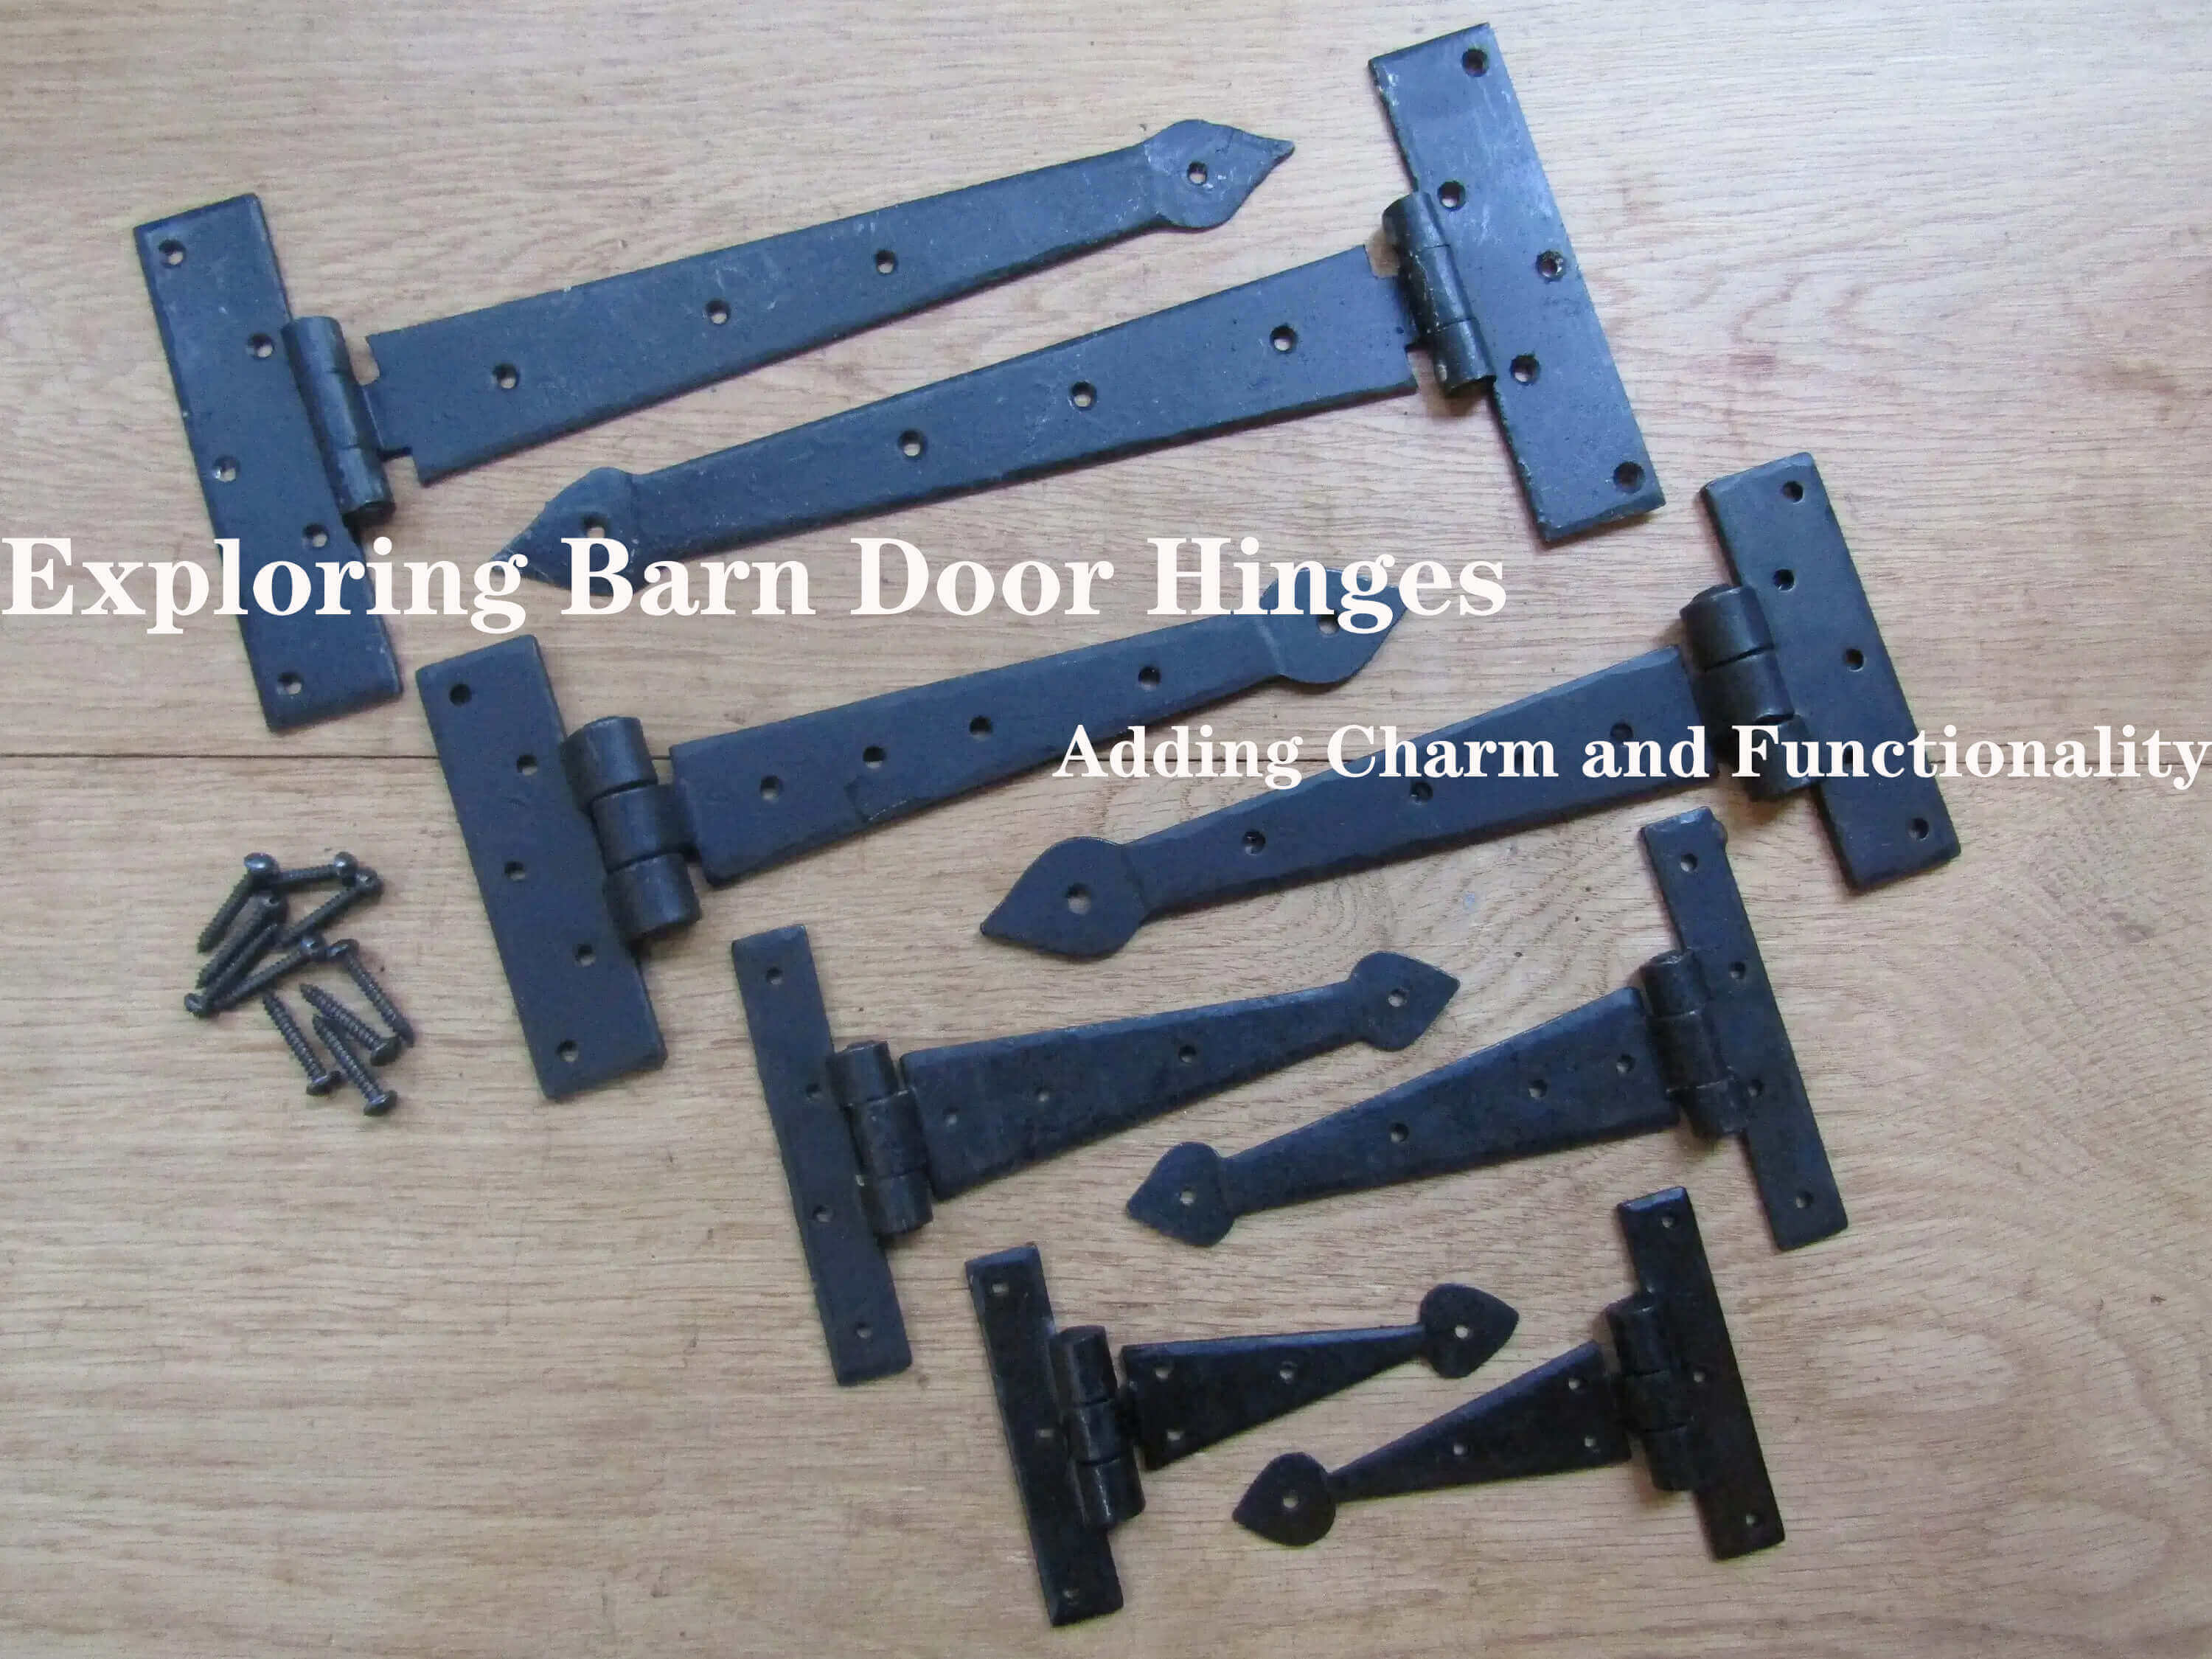 Exploring Barn Door Hinges: Adding Charm and Functionality